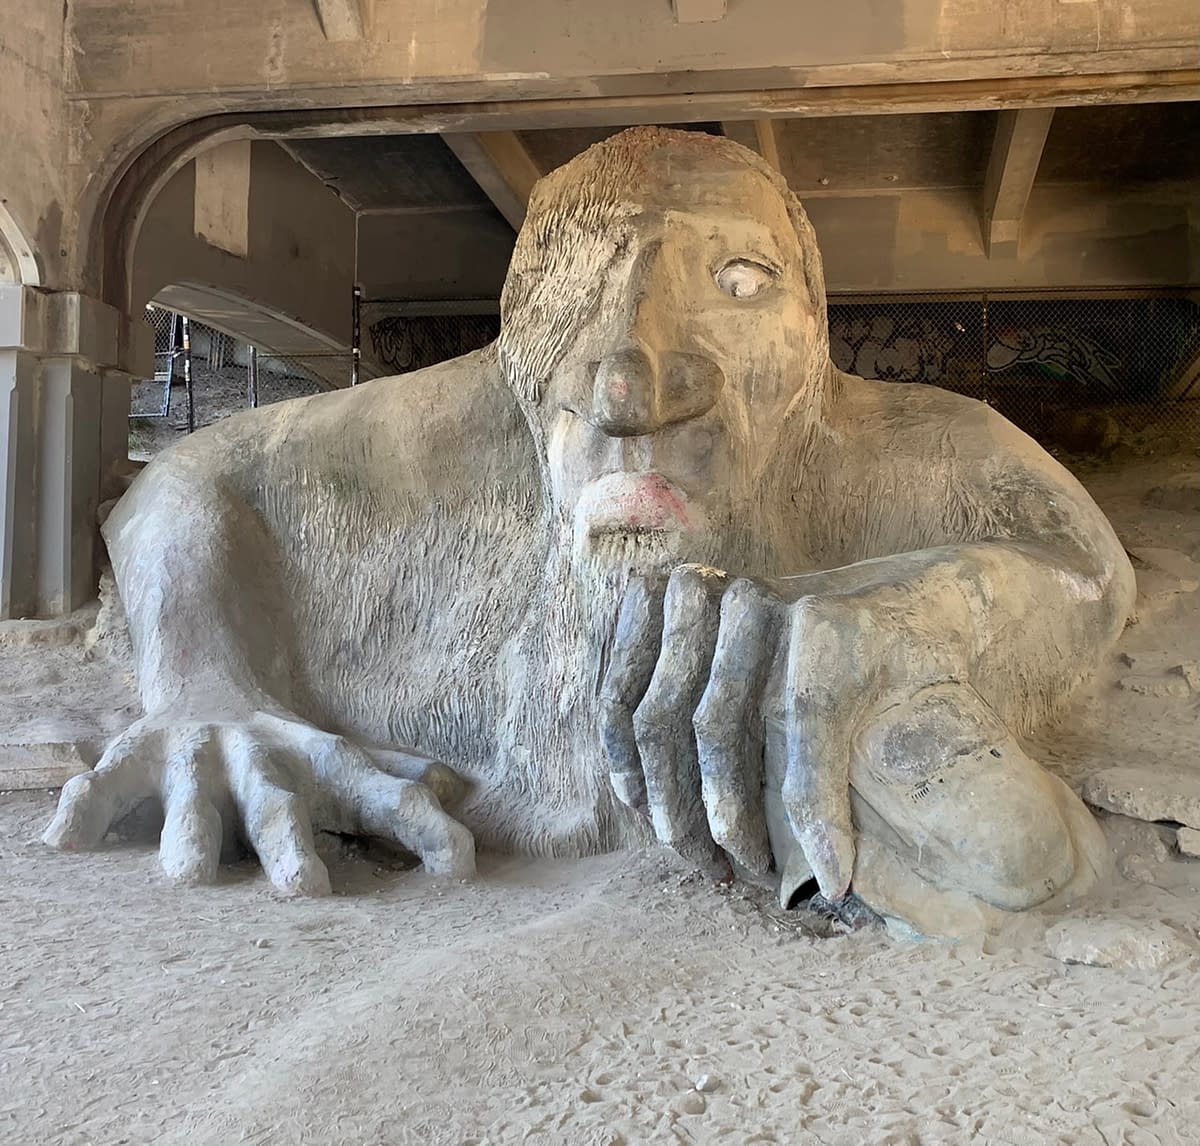 The Fremont Troll sitting underneath the north end of the Aurora Bridge in Seattle